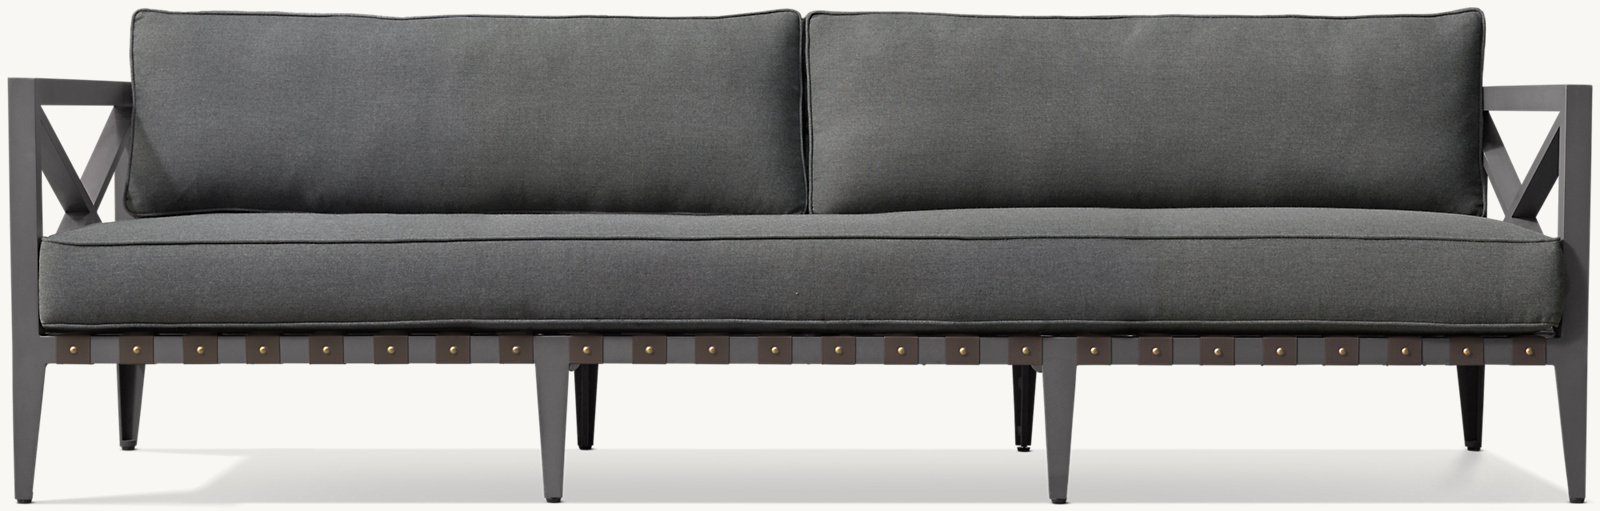 91&#190;&#34; sofa shown. Cushions (sold separately) shown in Charcoal Perennials&#174; Performance Canvas.